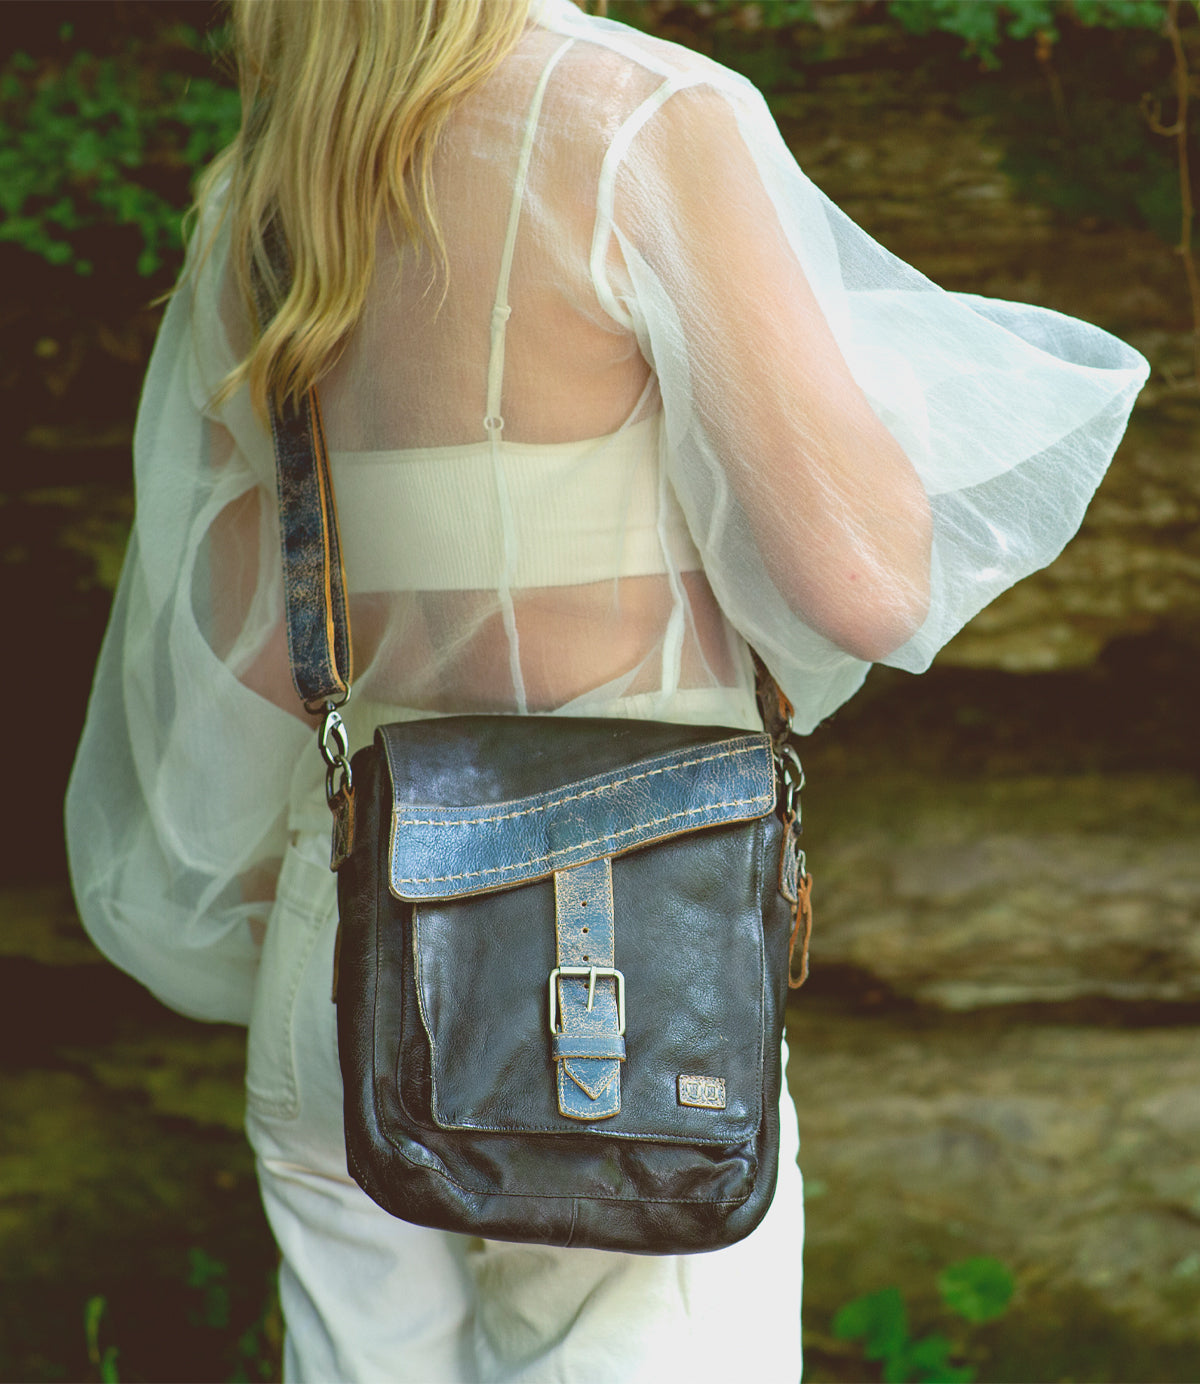 A woman with long blonde hair seen from behind wearing a sheer white shawl and white pants, carrying a Bed Stu Ainhoa LTC dark leather crossbody handbag.